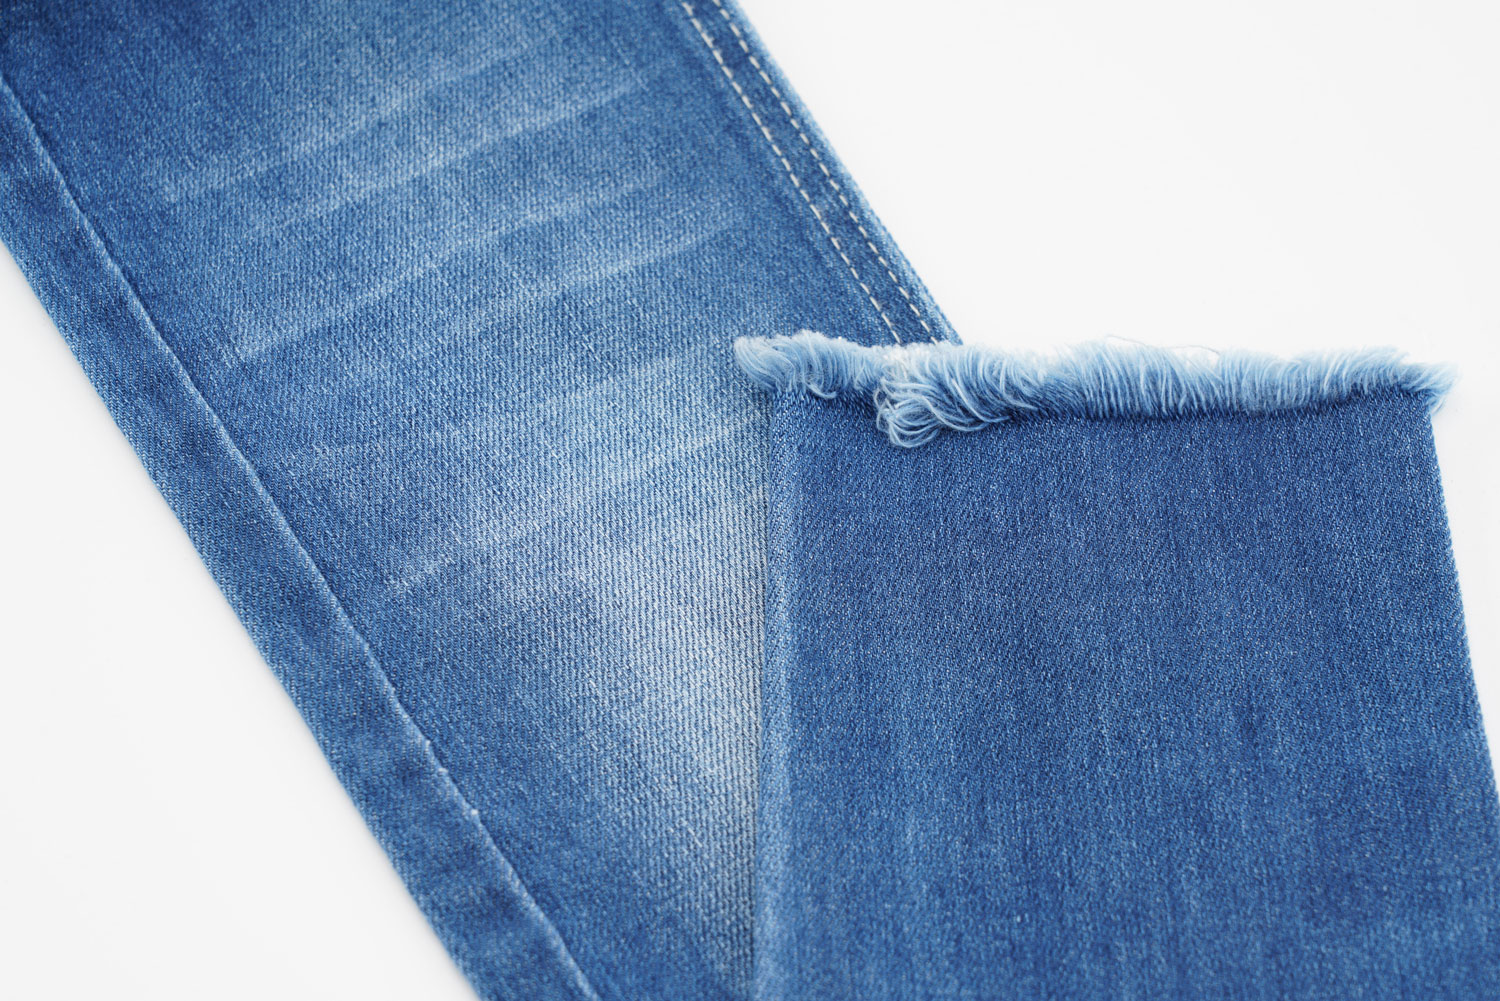 5 Reasons a Denim Material Fabric Is Good for You 1